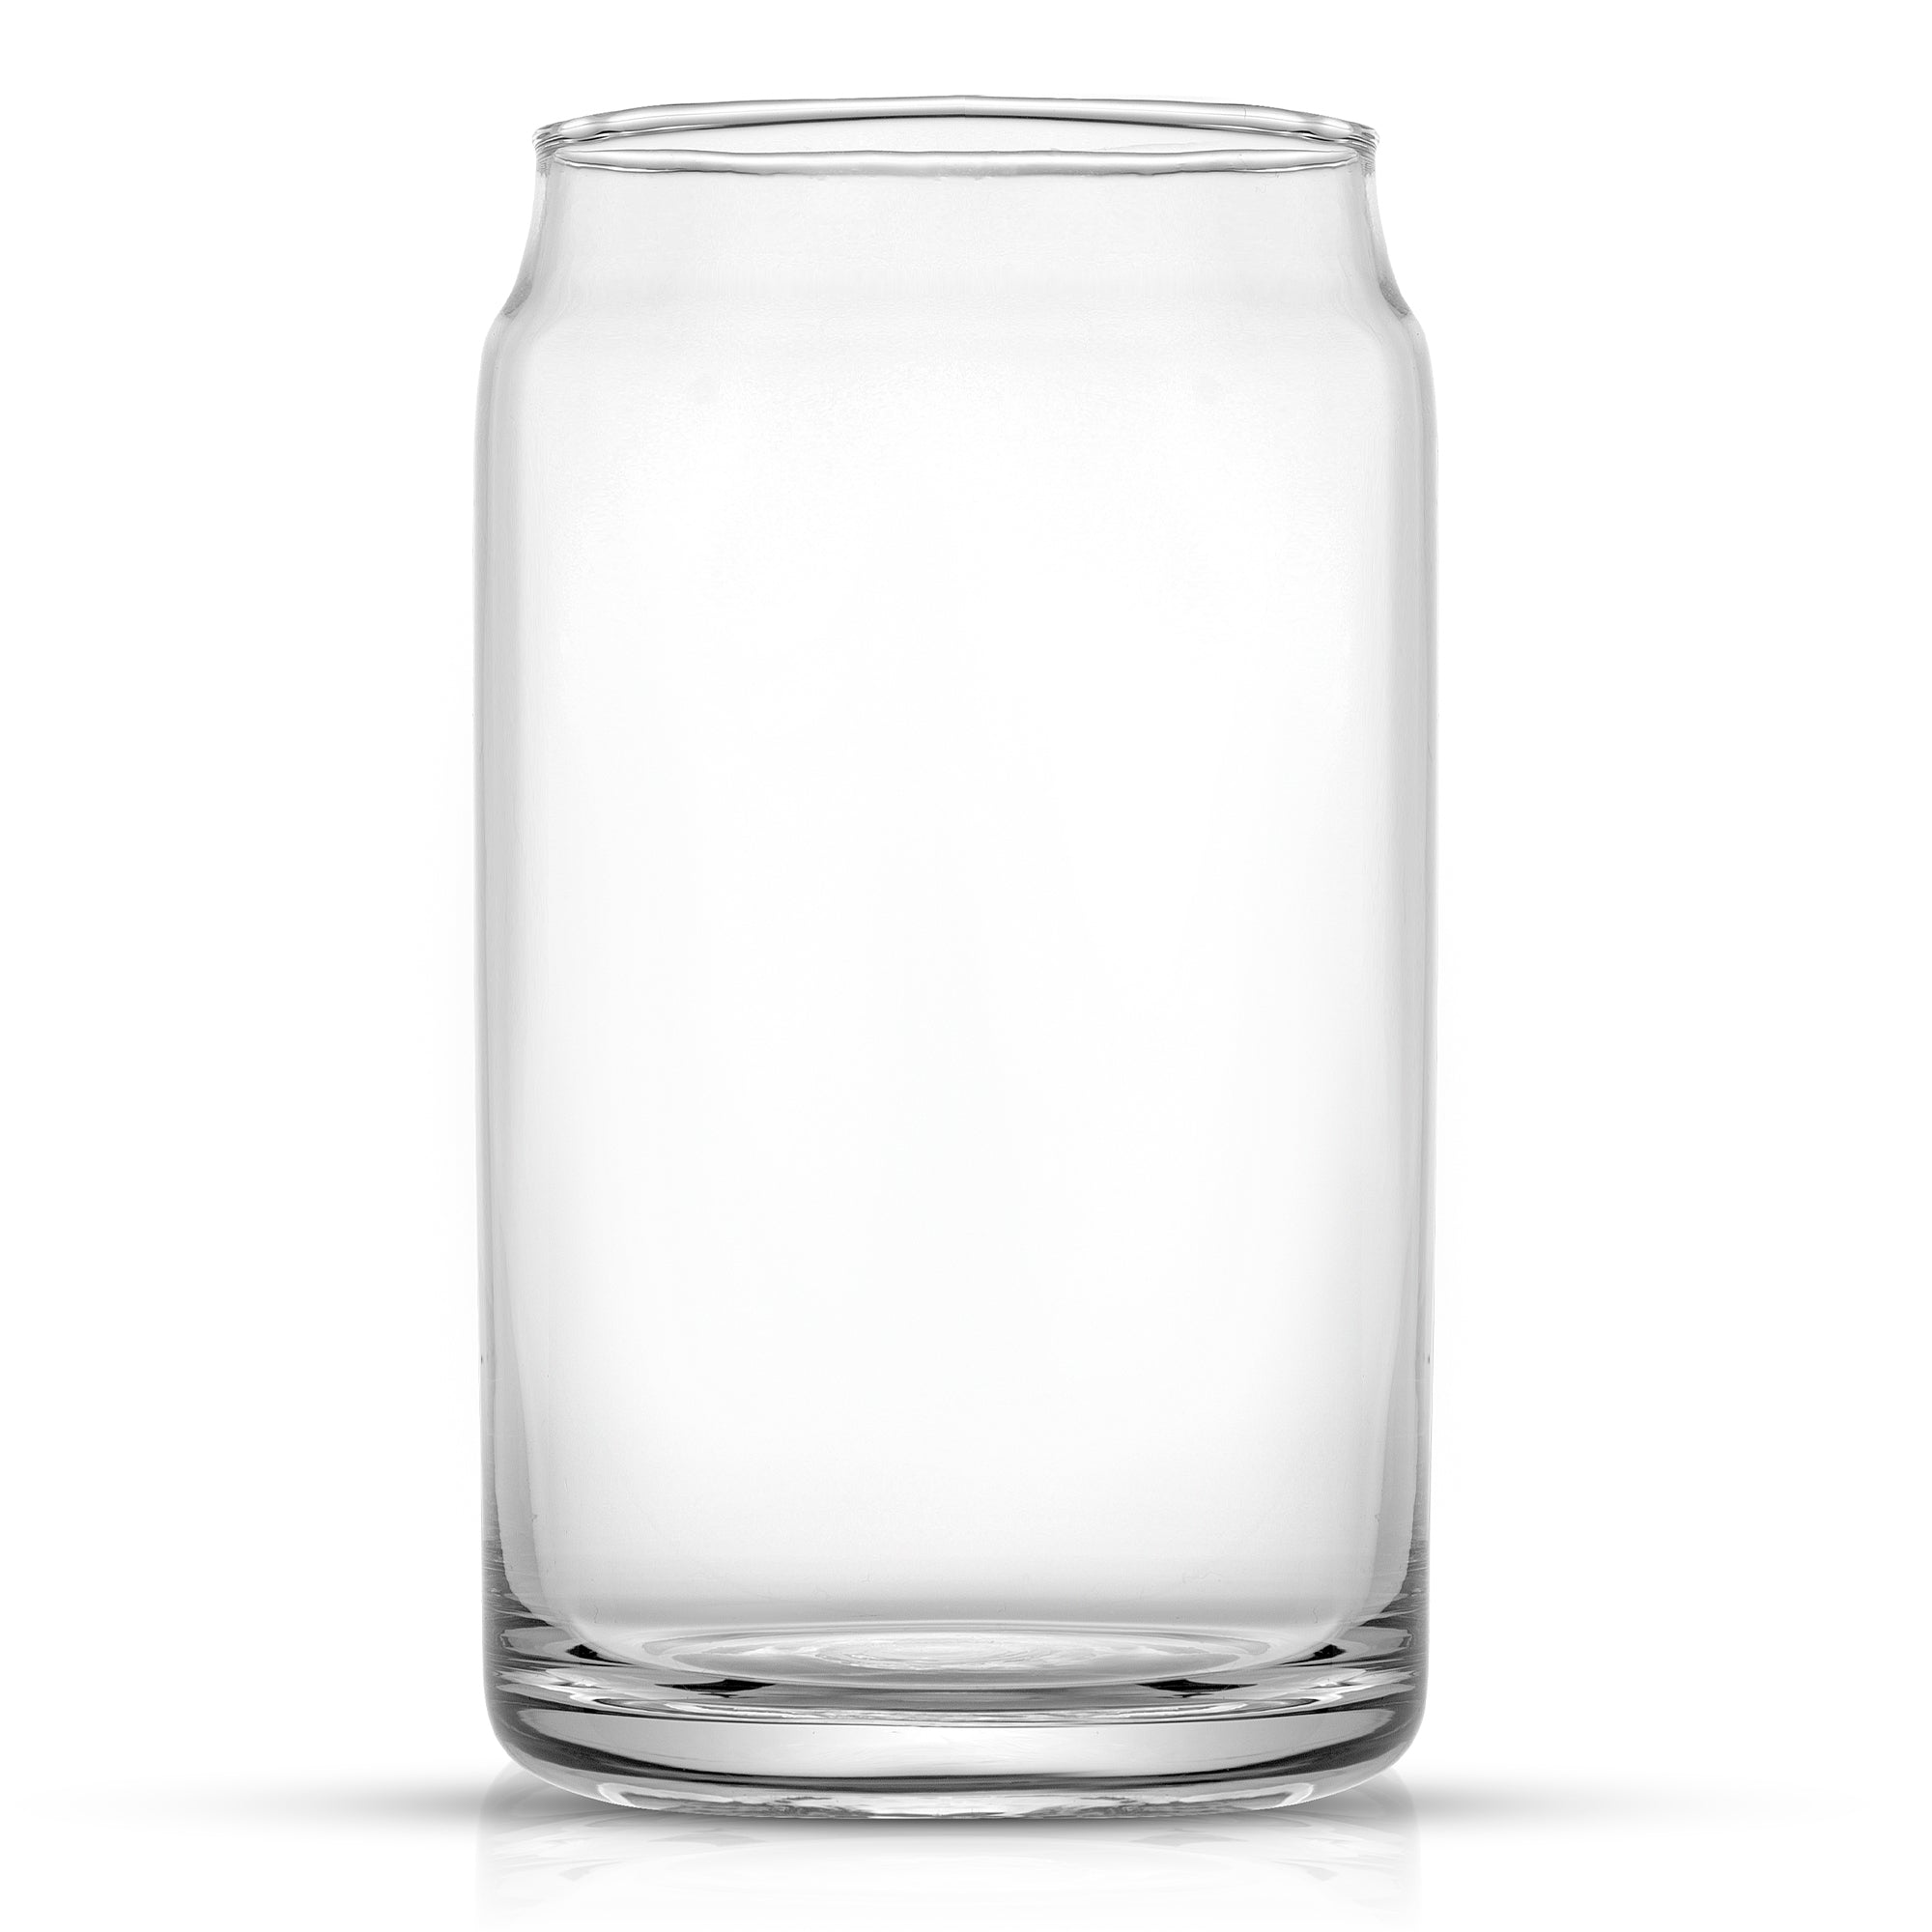 Classic Can Shape Tumbler Drinking Glass Cups